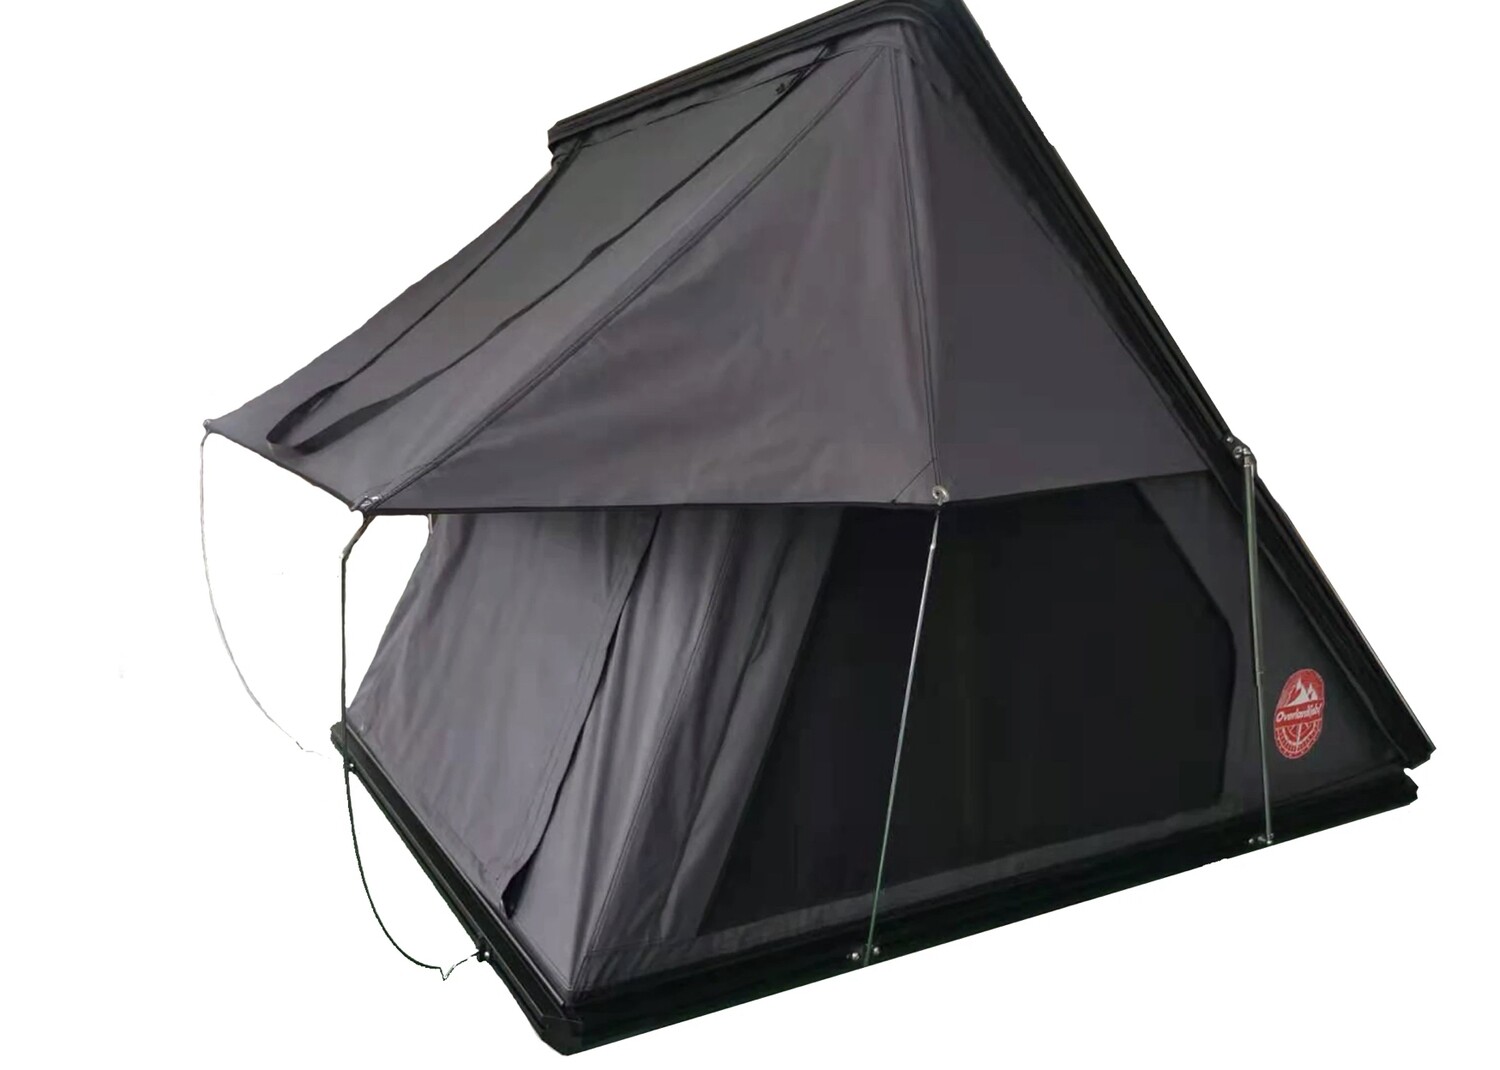 Summit Roof Top Tent - by Overland(ish)